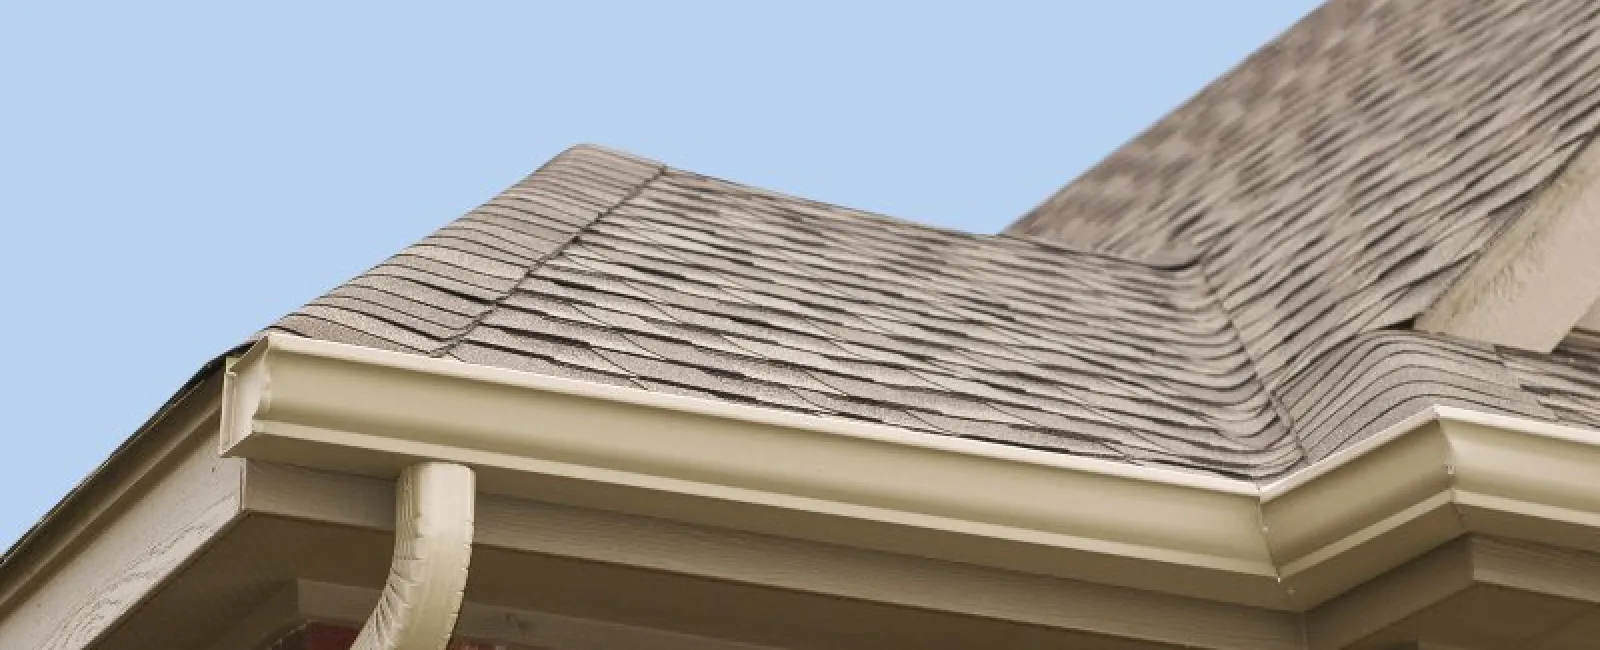 6 Things New Homeowners Need to Know About Their Roof